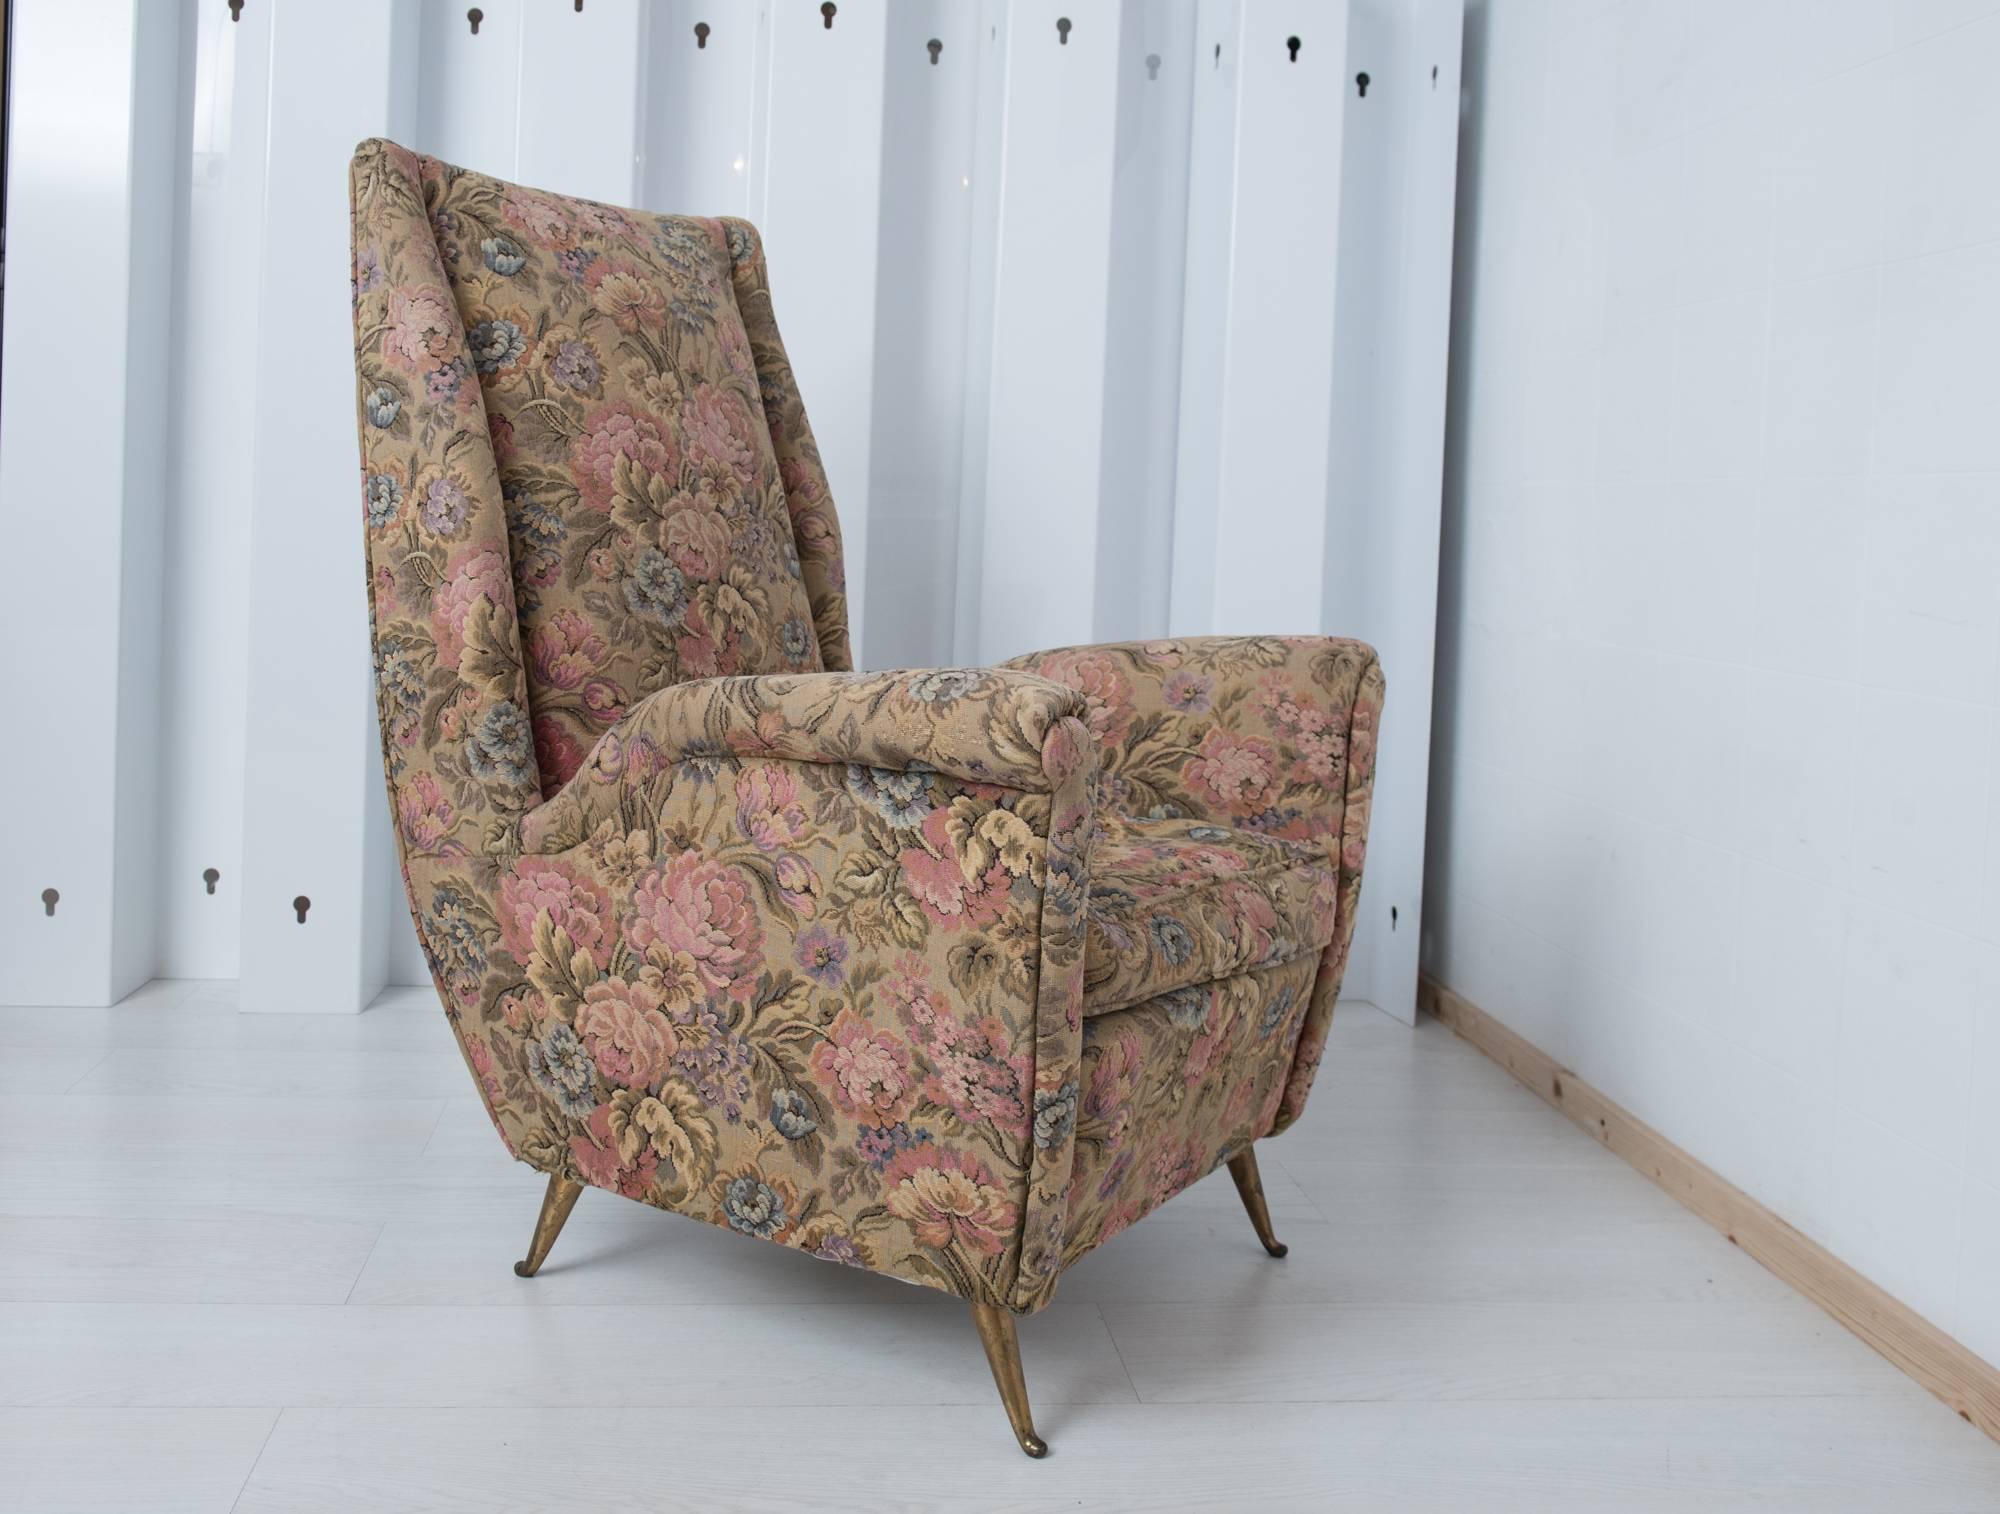 Vintage Armchair attributed to Gio Ponti and produced by ISA in 1950.
The chair features a solid wooden structure, legs in brass and original Gobelin upholstery.